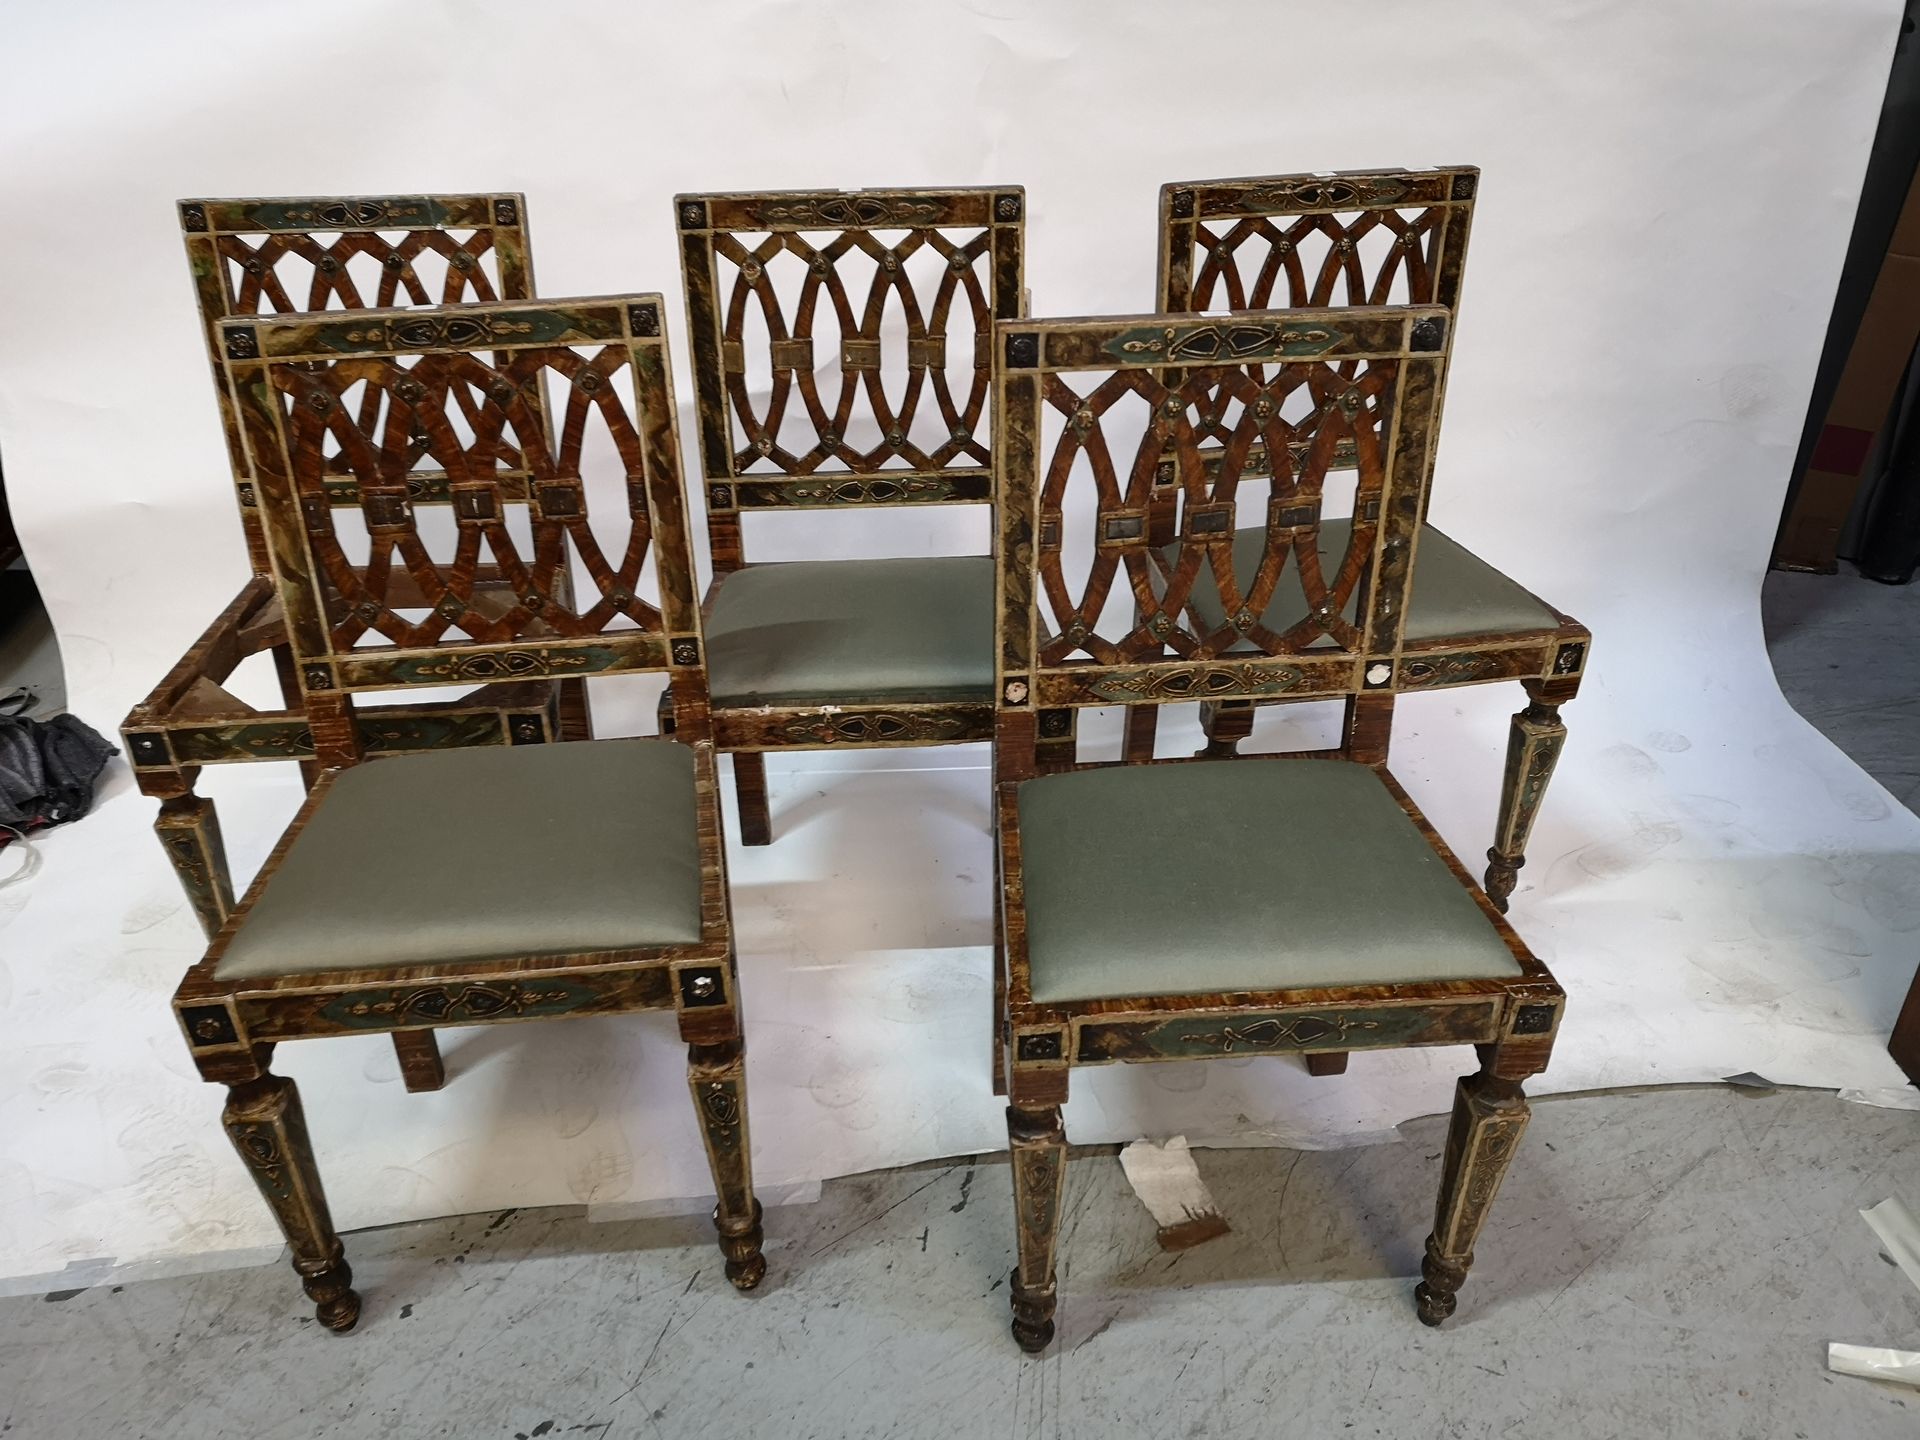 Null Suite of 5 chairs in carved and painted wood, openwork back. Italian work, &hellip;